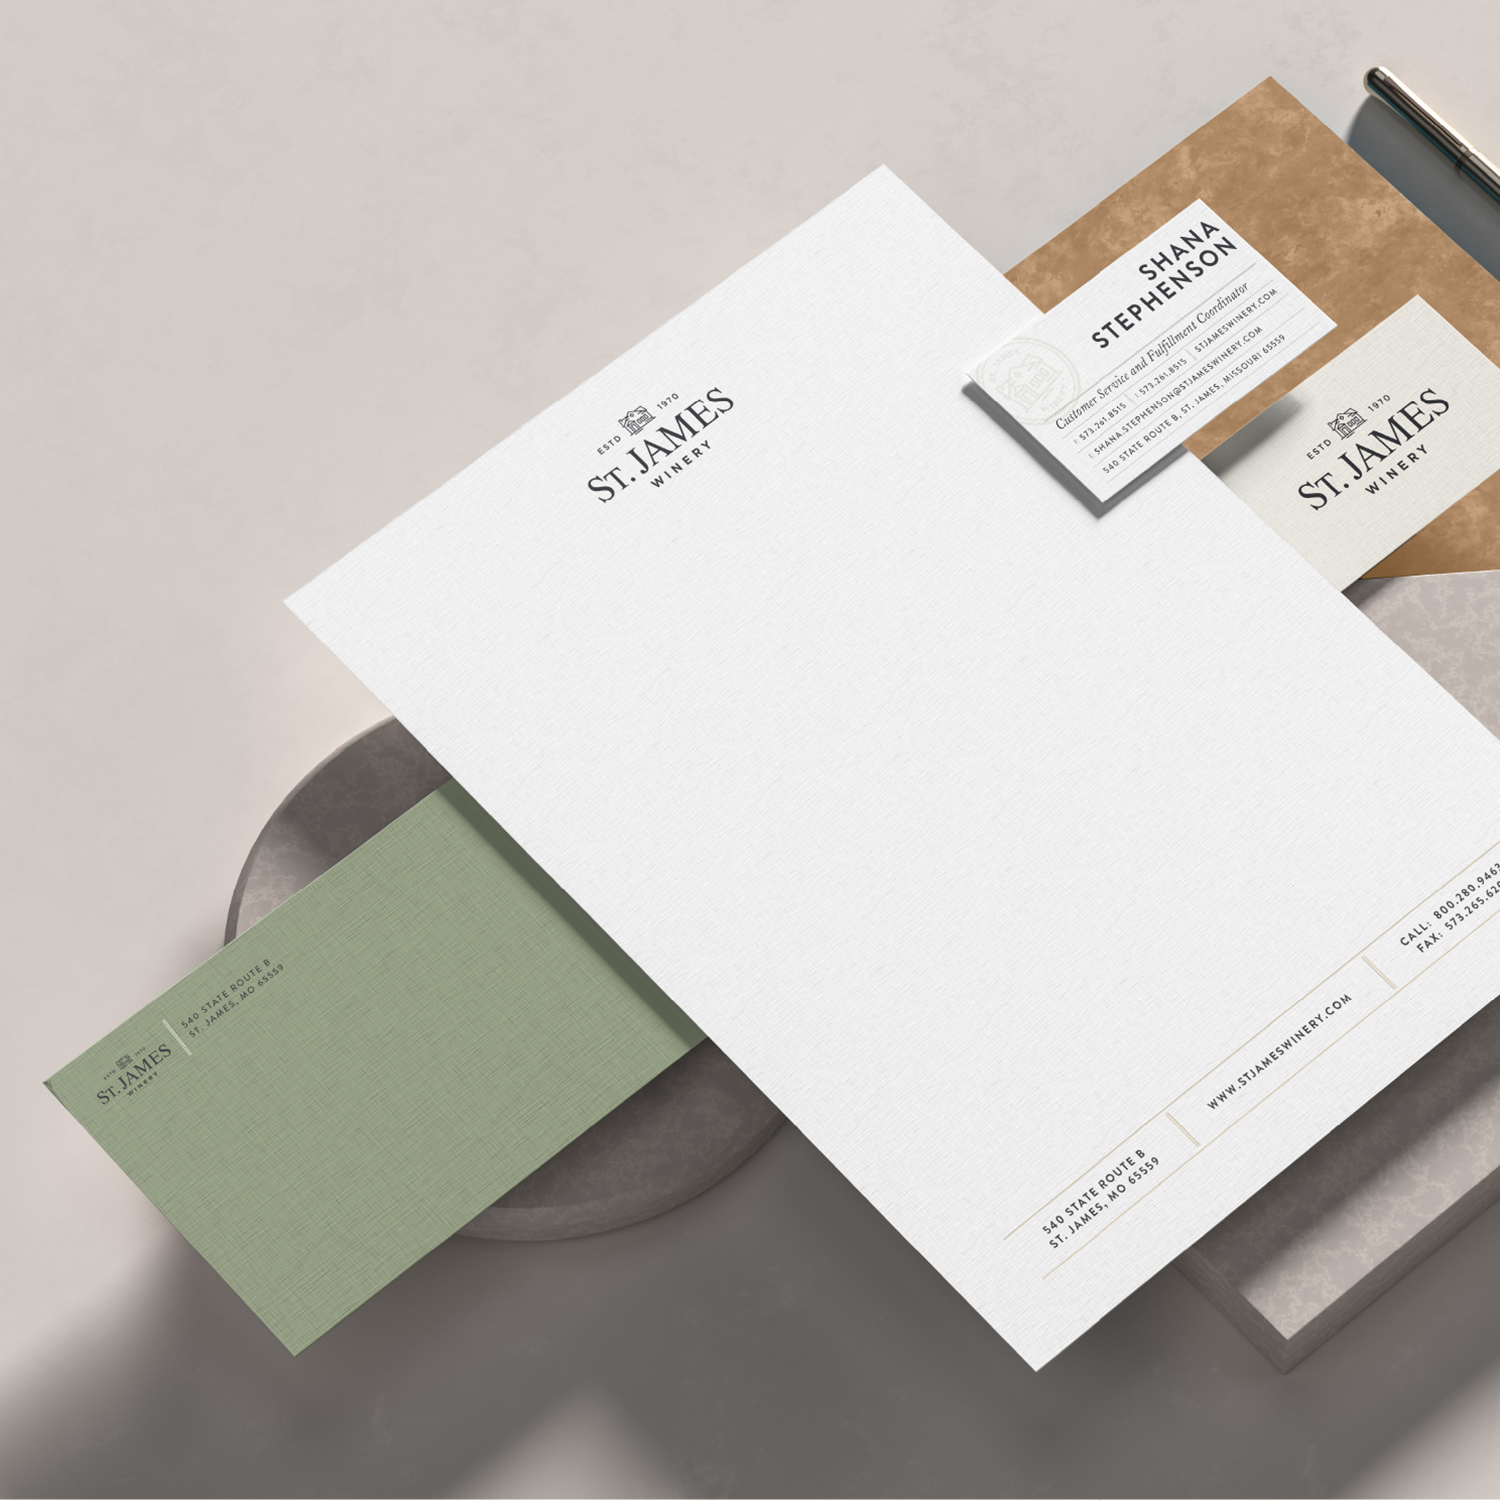 St James Winery letterhead, stationary, business card, collateral, branding, print material